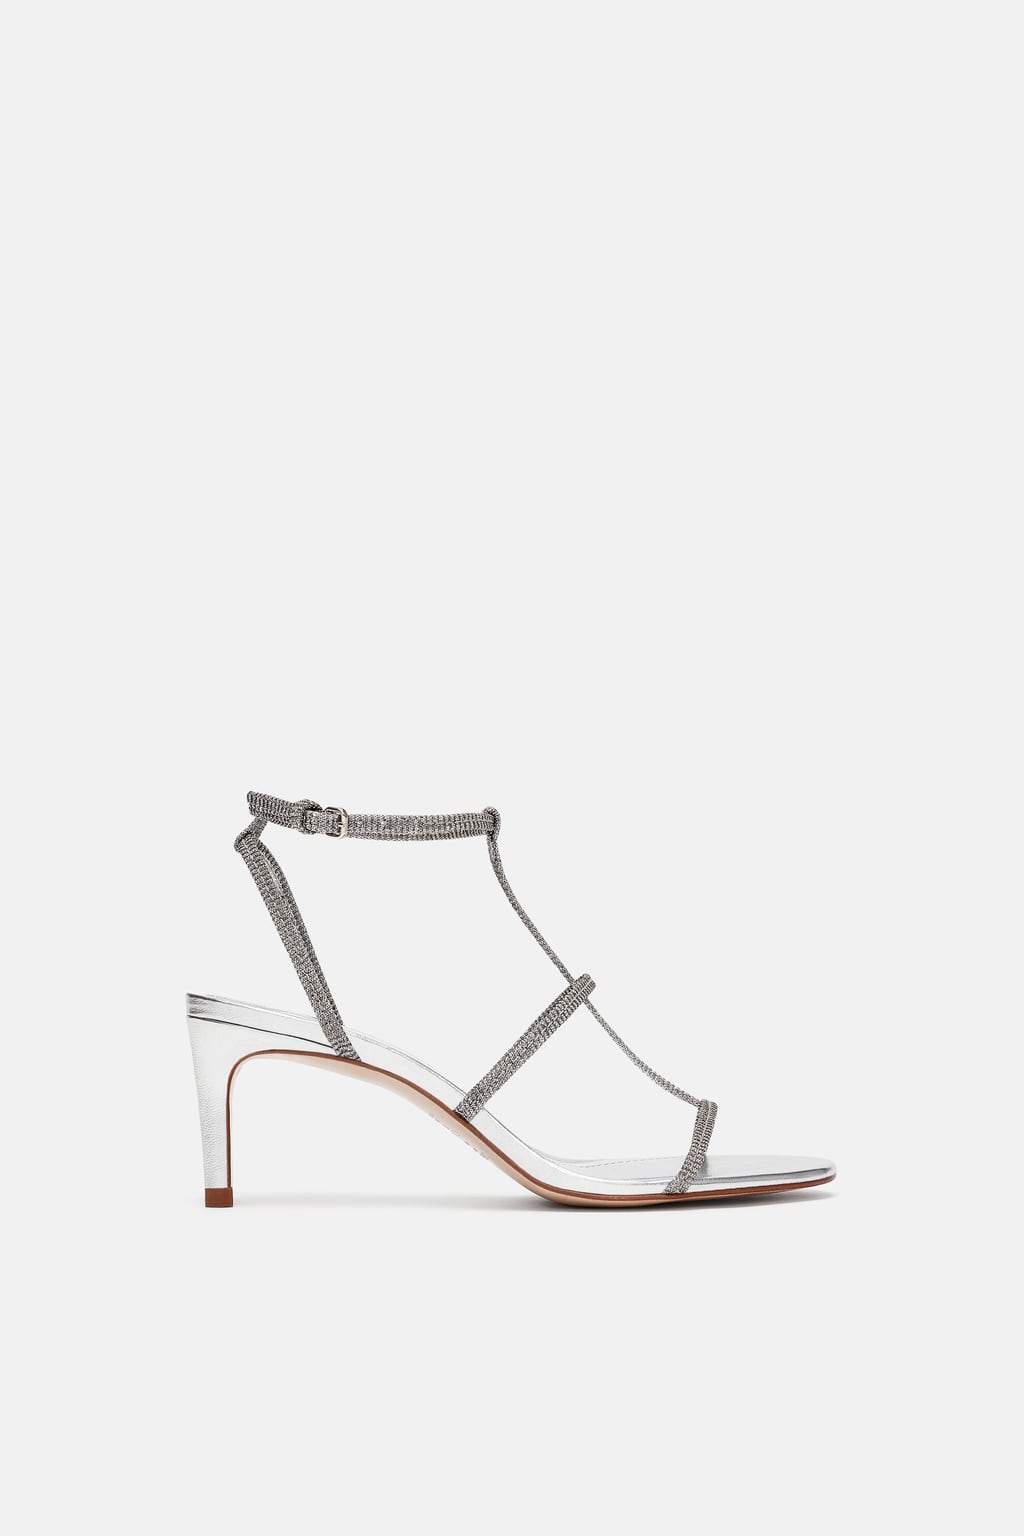 LAMINATED HIGH-HEEL STRAPPY SANDALS